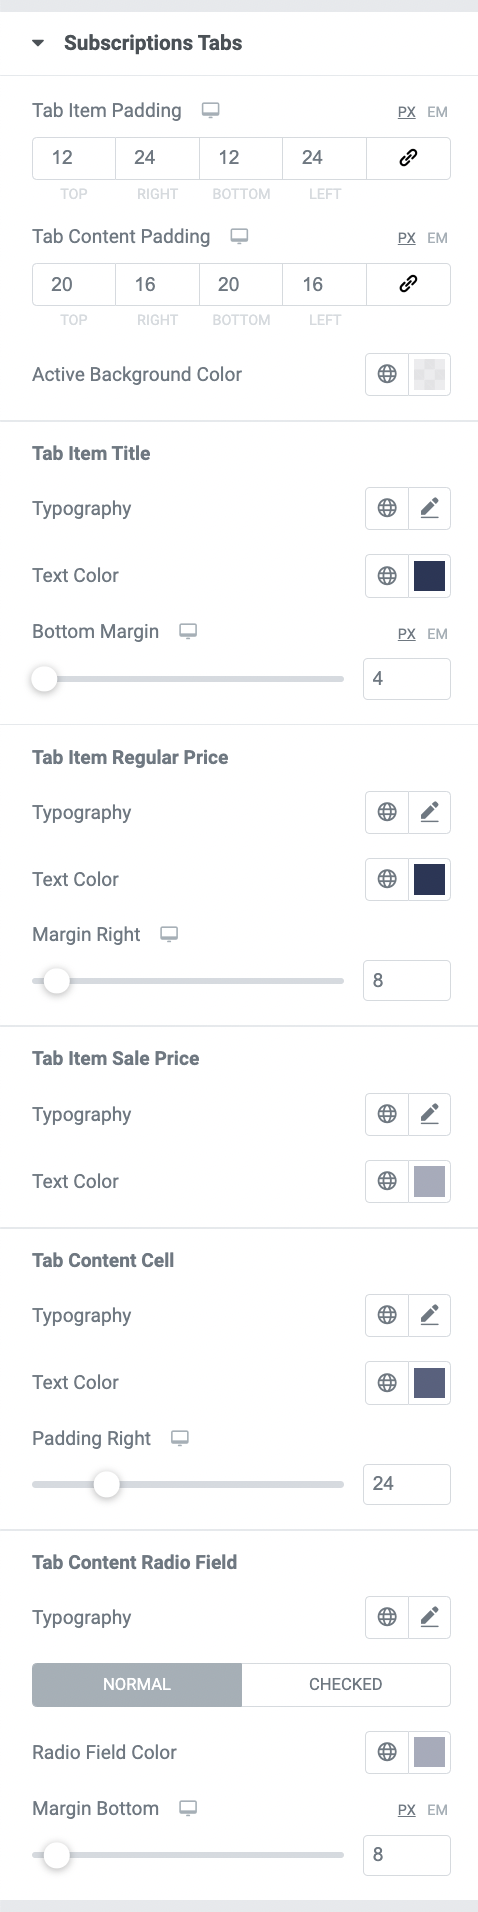 elementor-add-to-cart-style-subscriptions-tabs.png